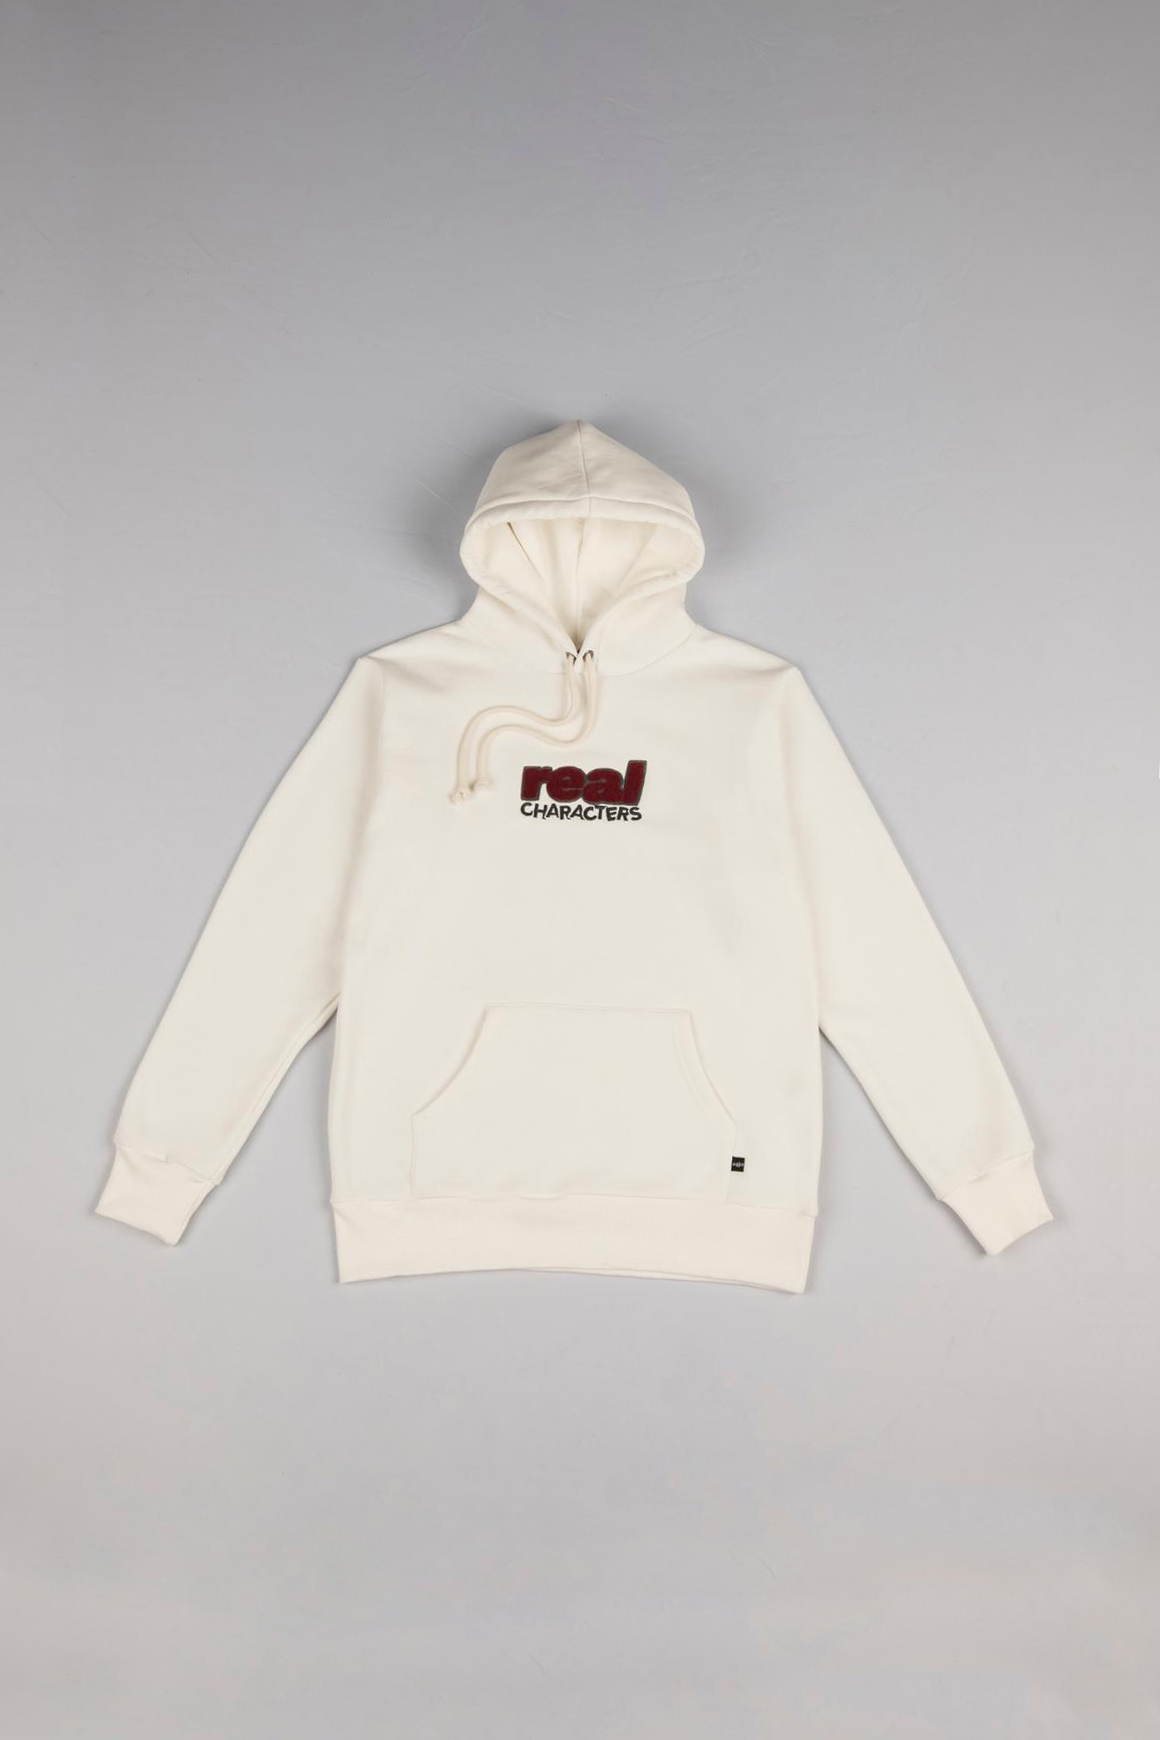 RARE ONE-OFFs Off-White Hoodie - Real Characters